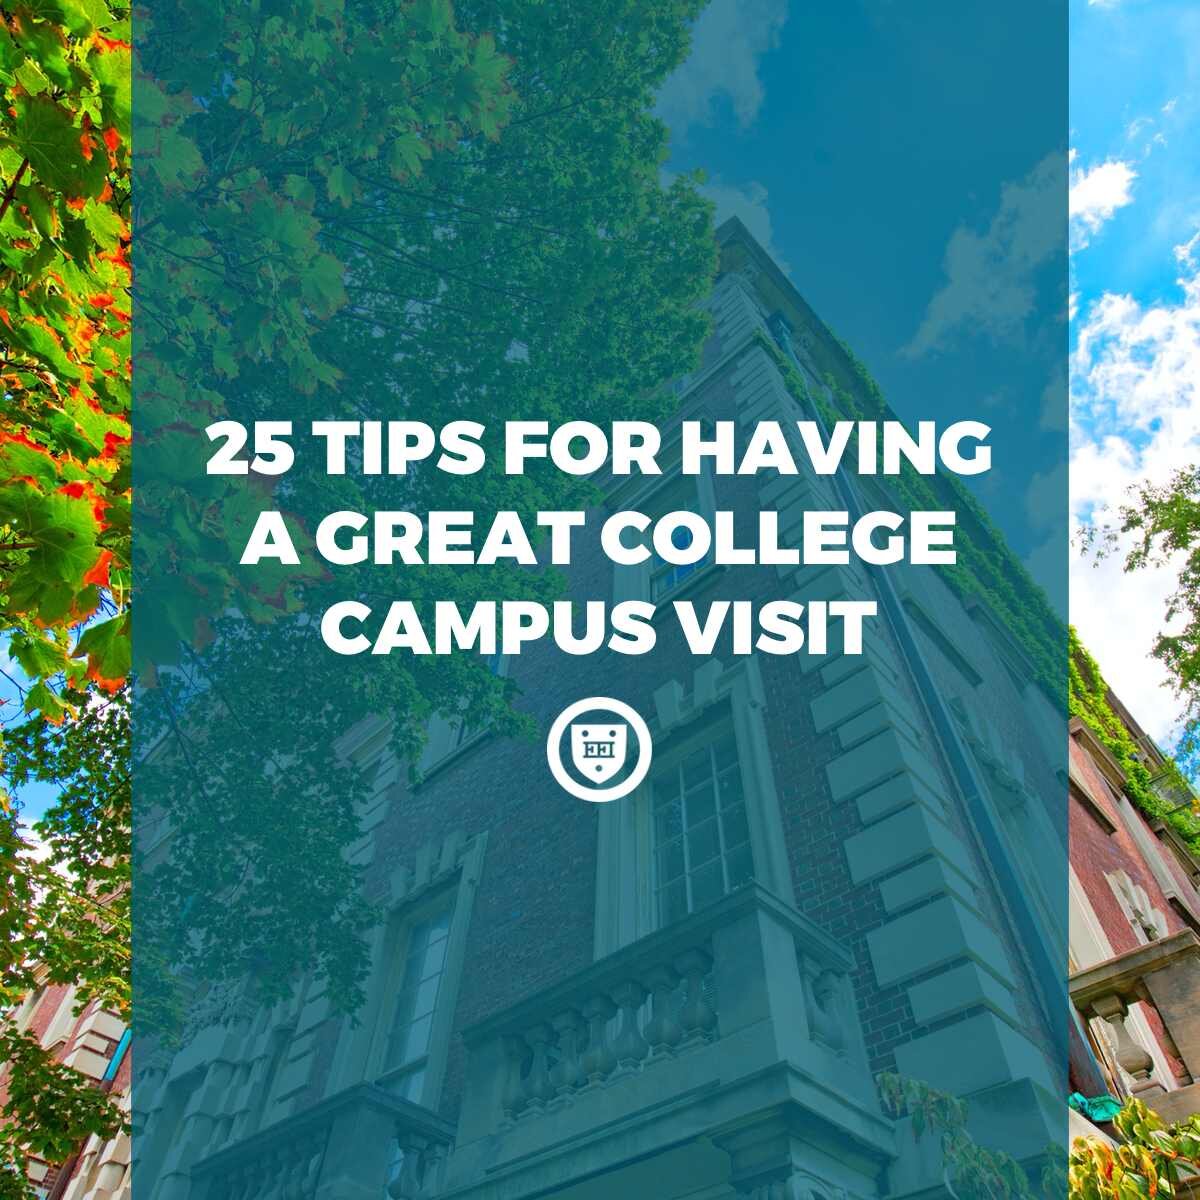 25 Tips for Having a Great College Campus Visit